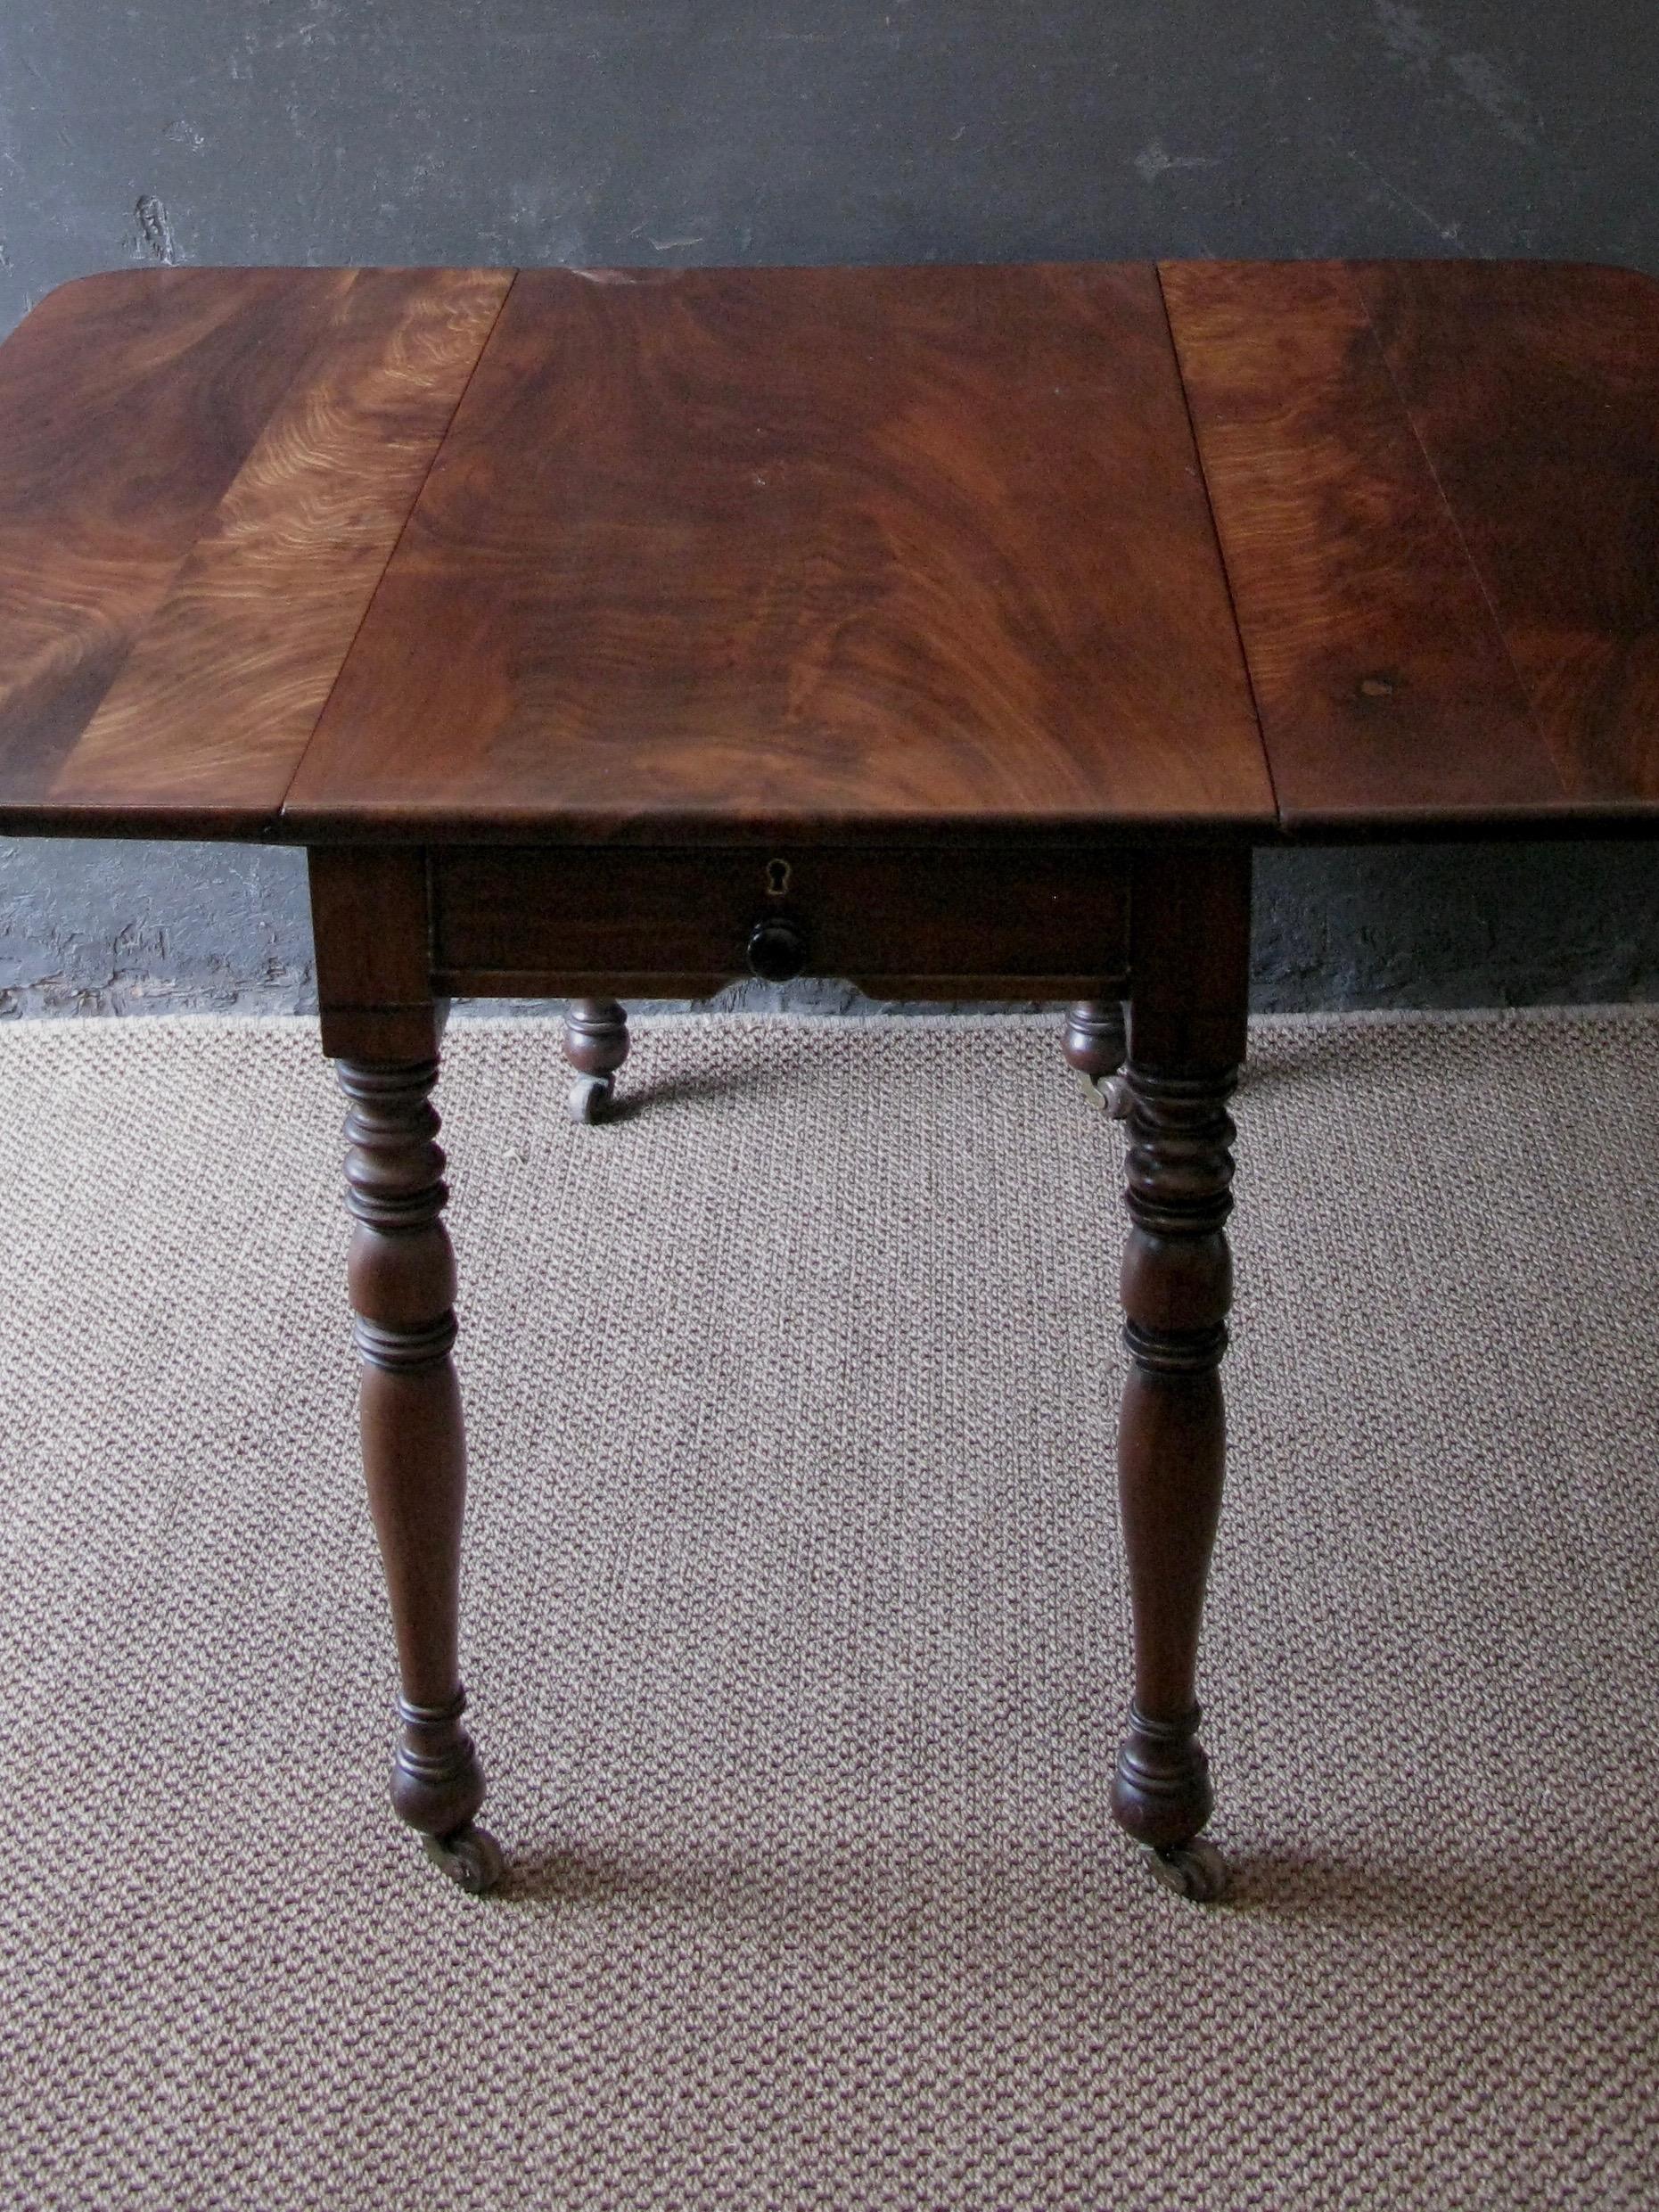 High Victorian Victorian Pembroke Table, English, 19th Century, Flame Mahogany, Small Dining